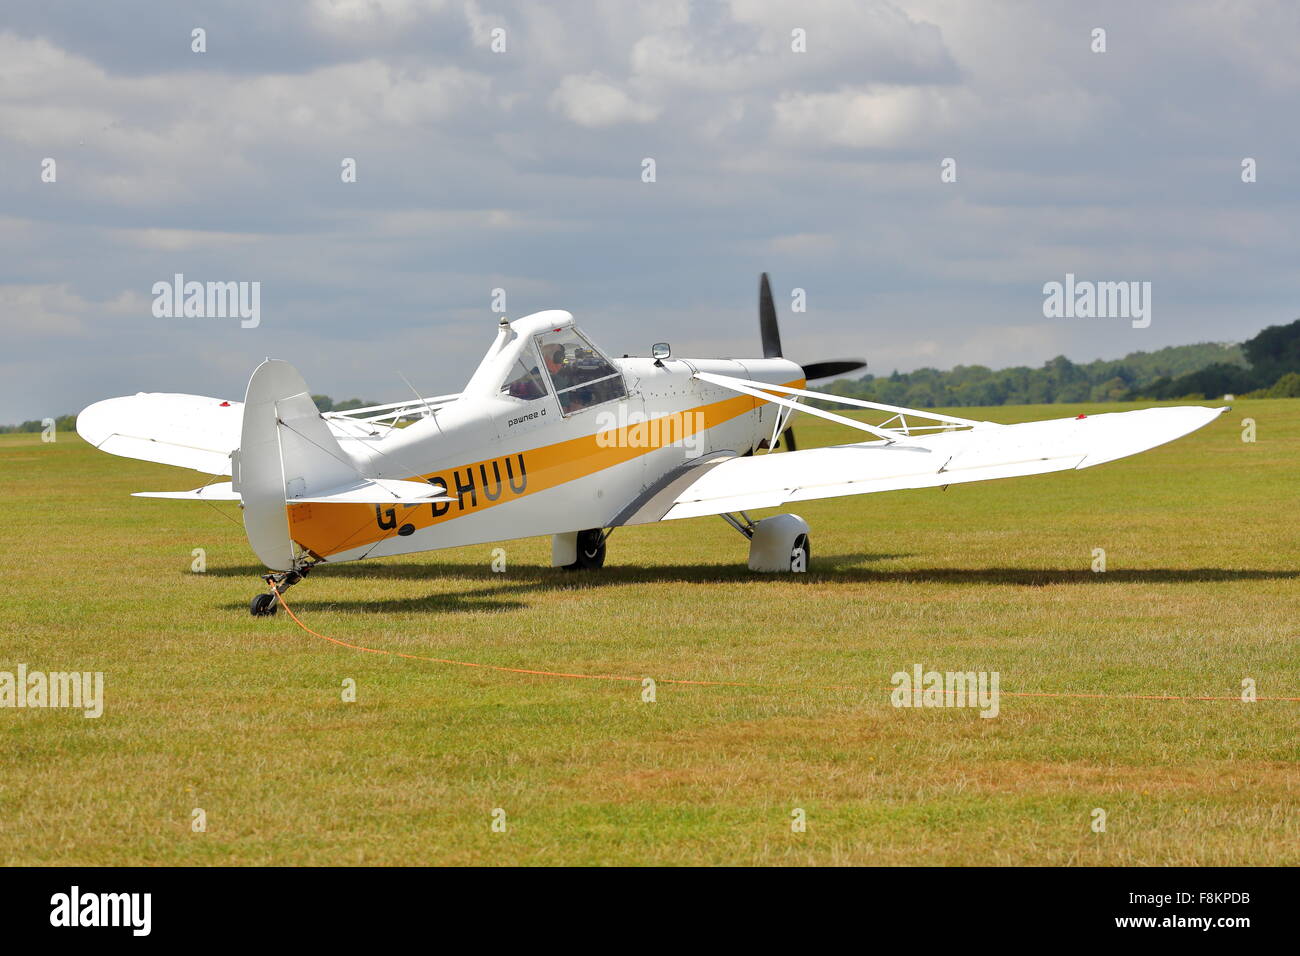 Piper Pawnee PA-25 D G-BHUU tug in action at Booker Airfield, Wycombe Airpark Stock Photo